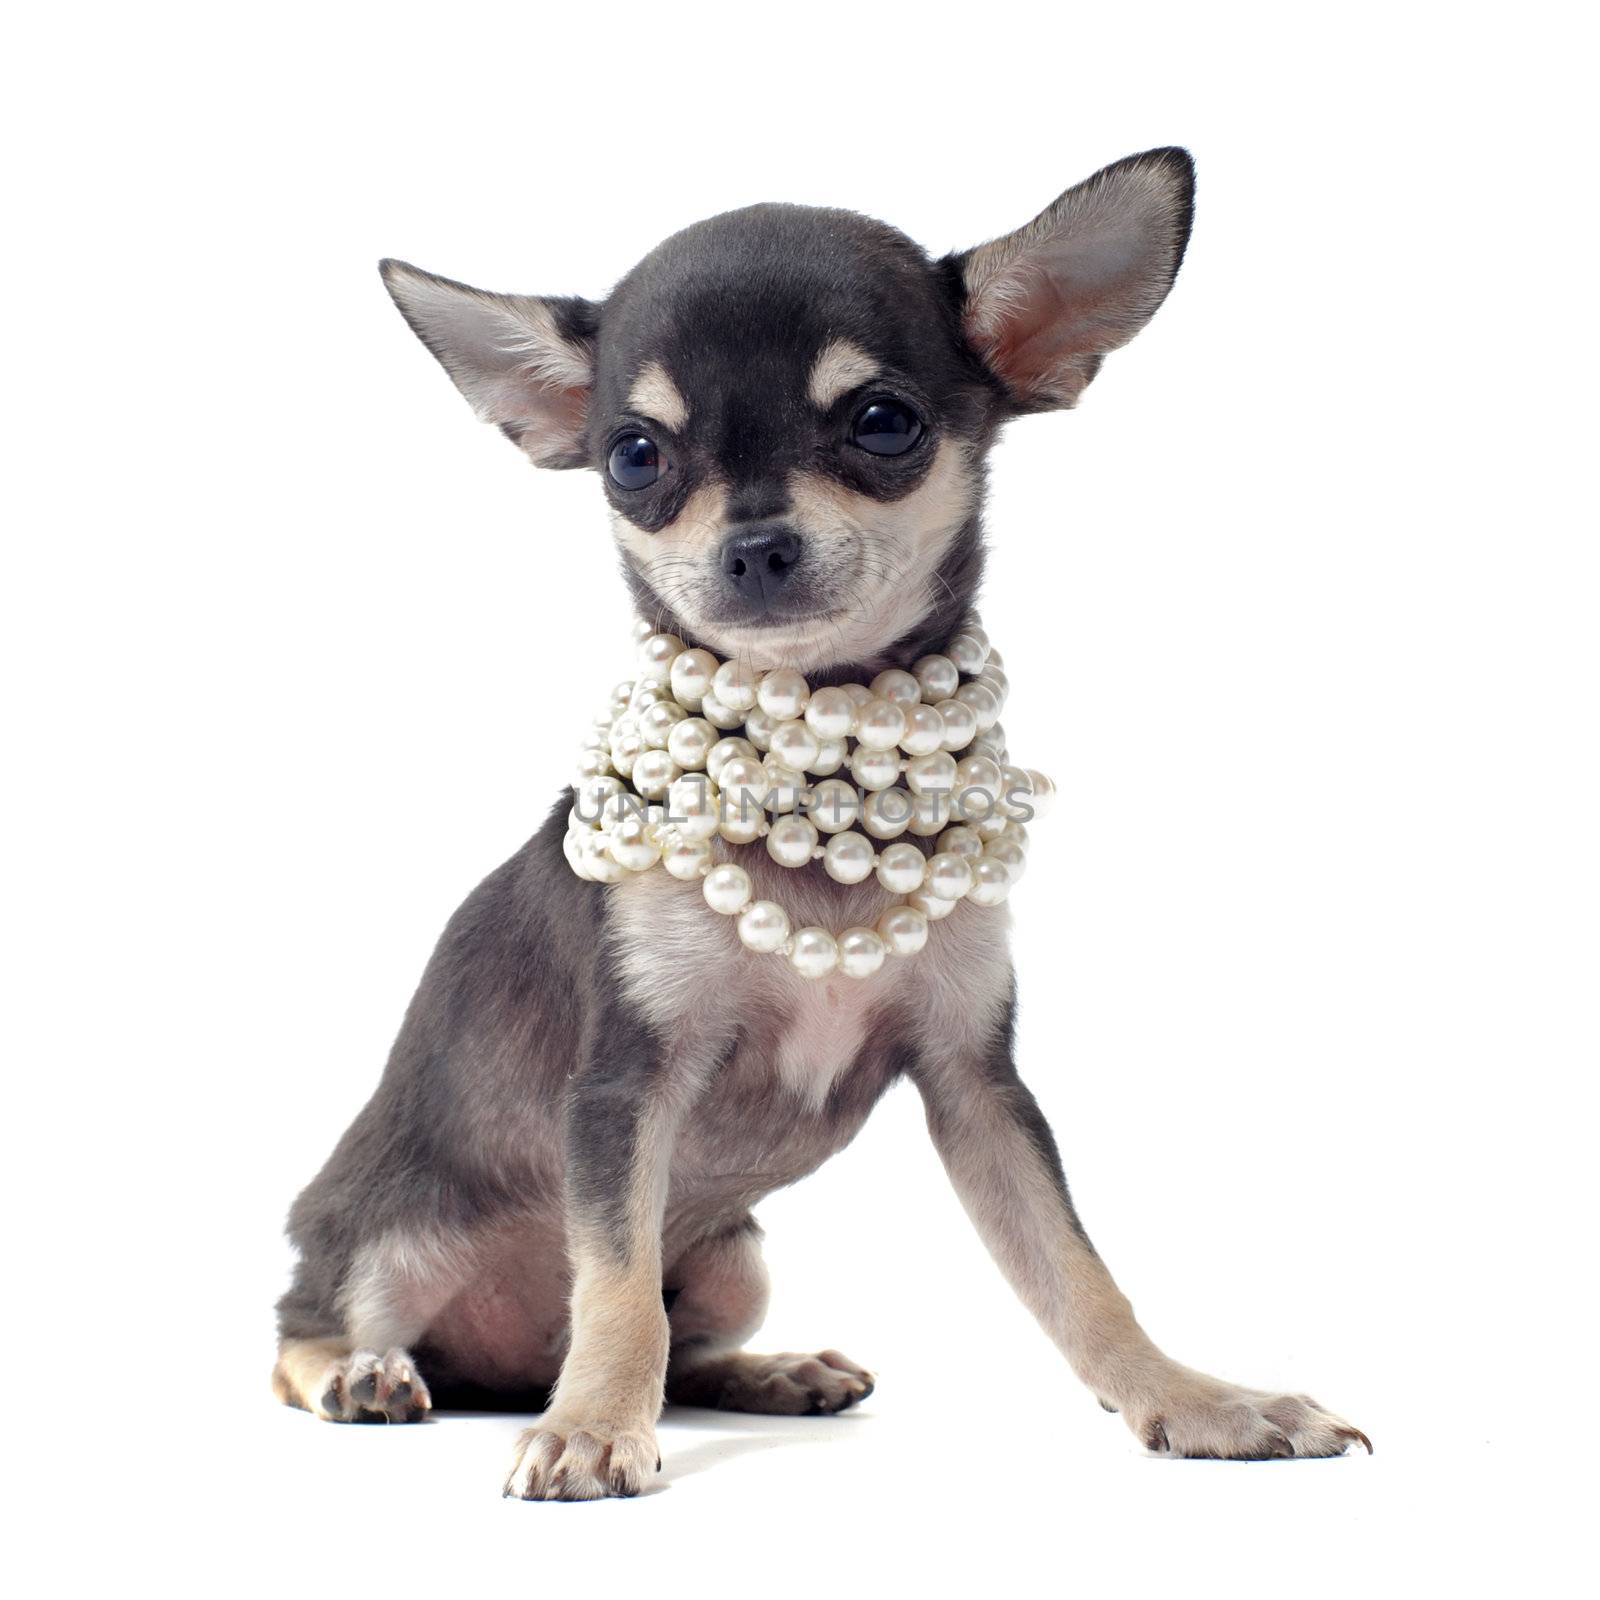 portrait of a cute purebred puppy chihuahua with pearl collar in front of white background